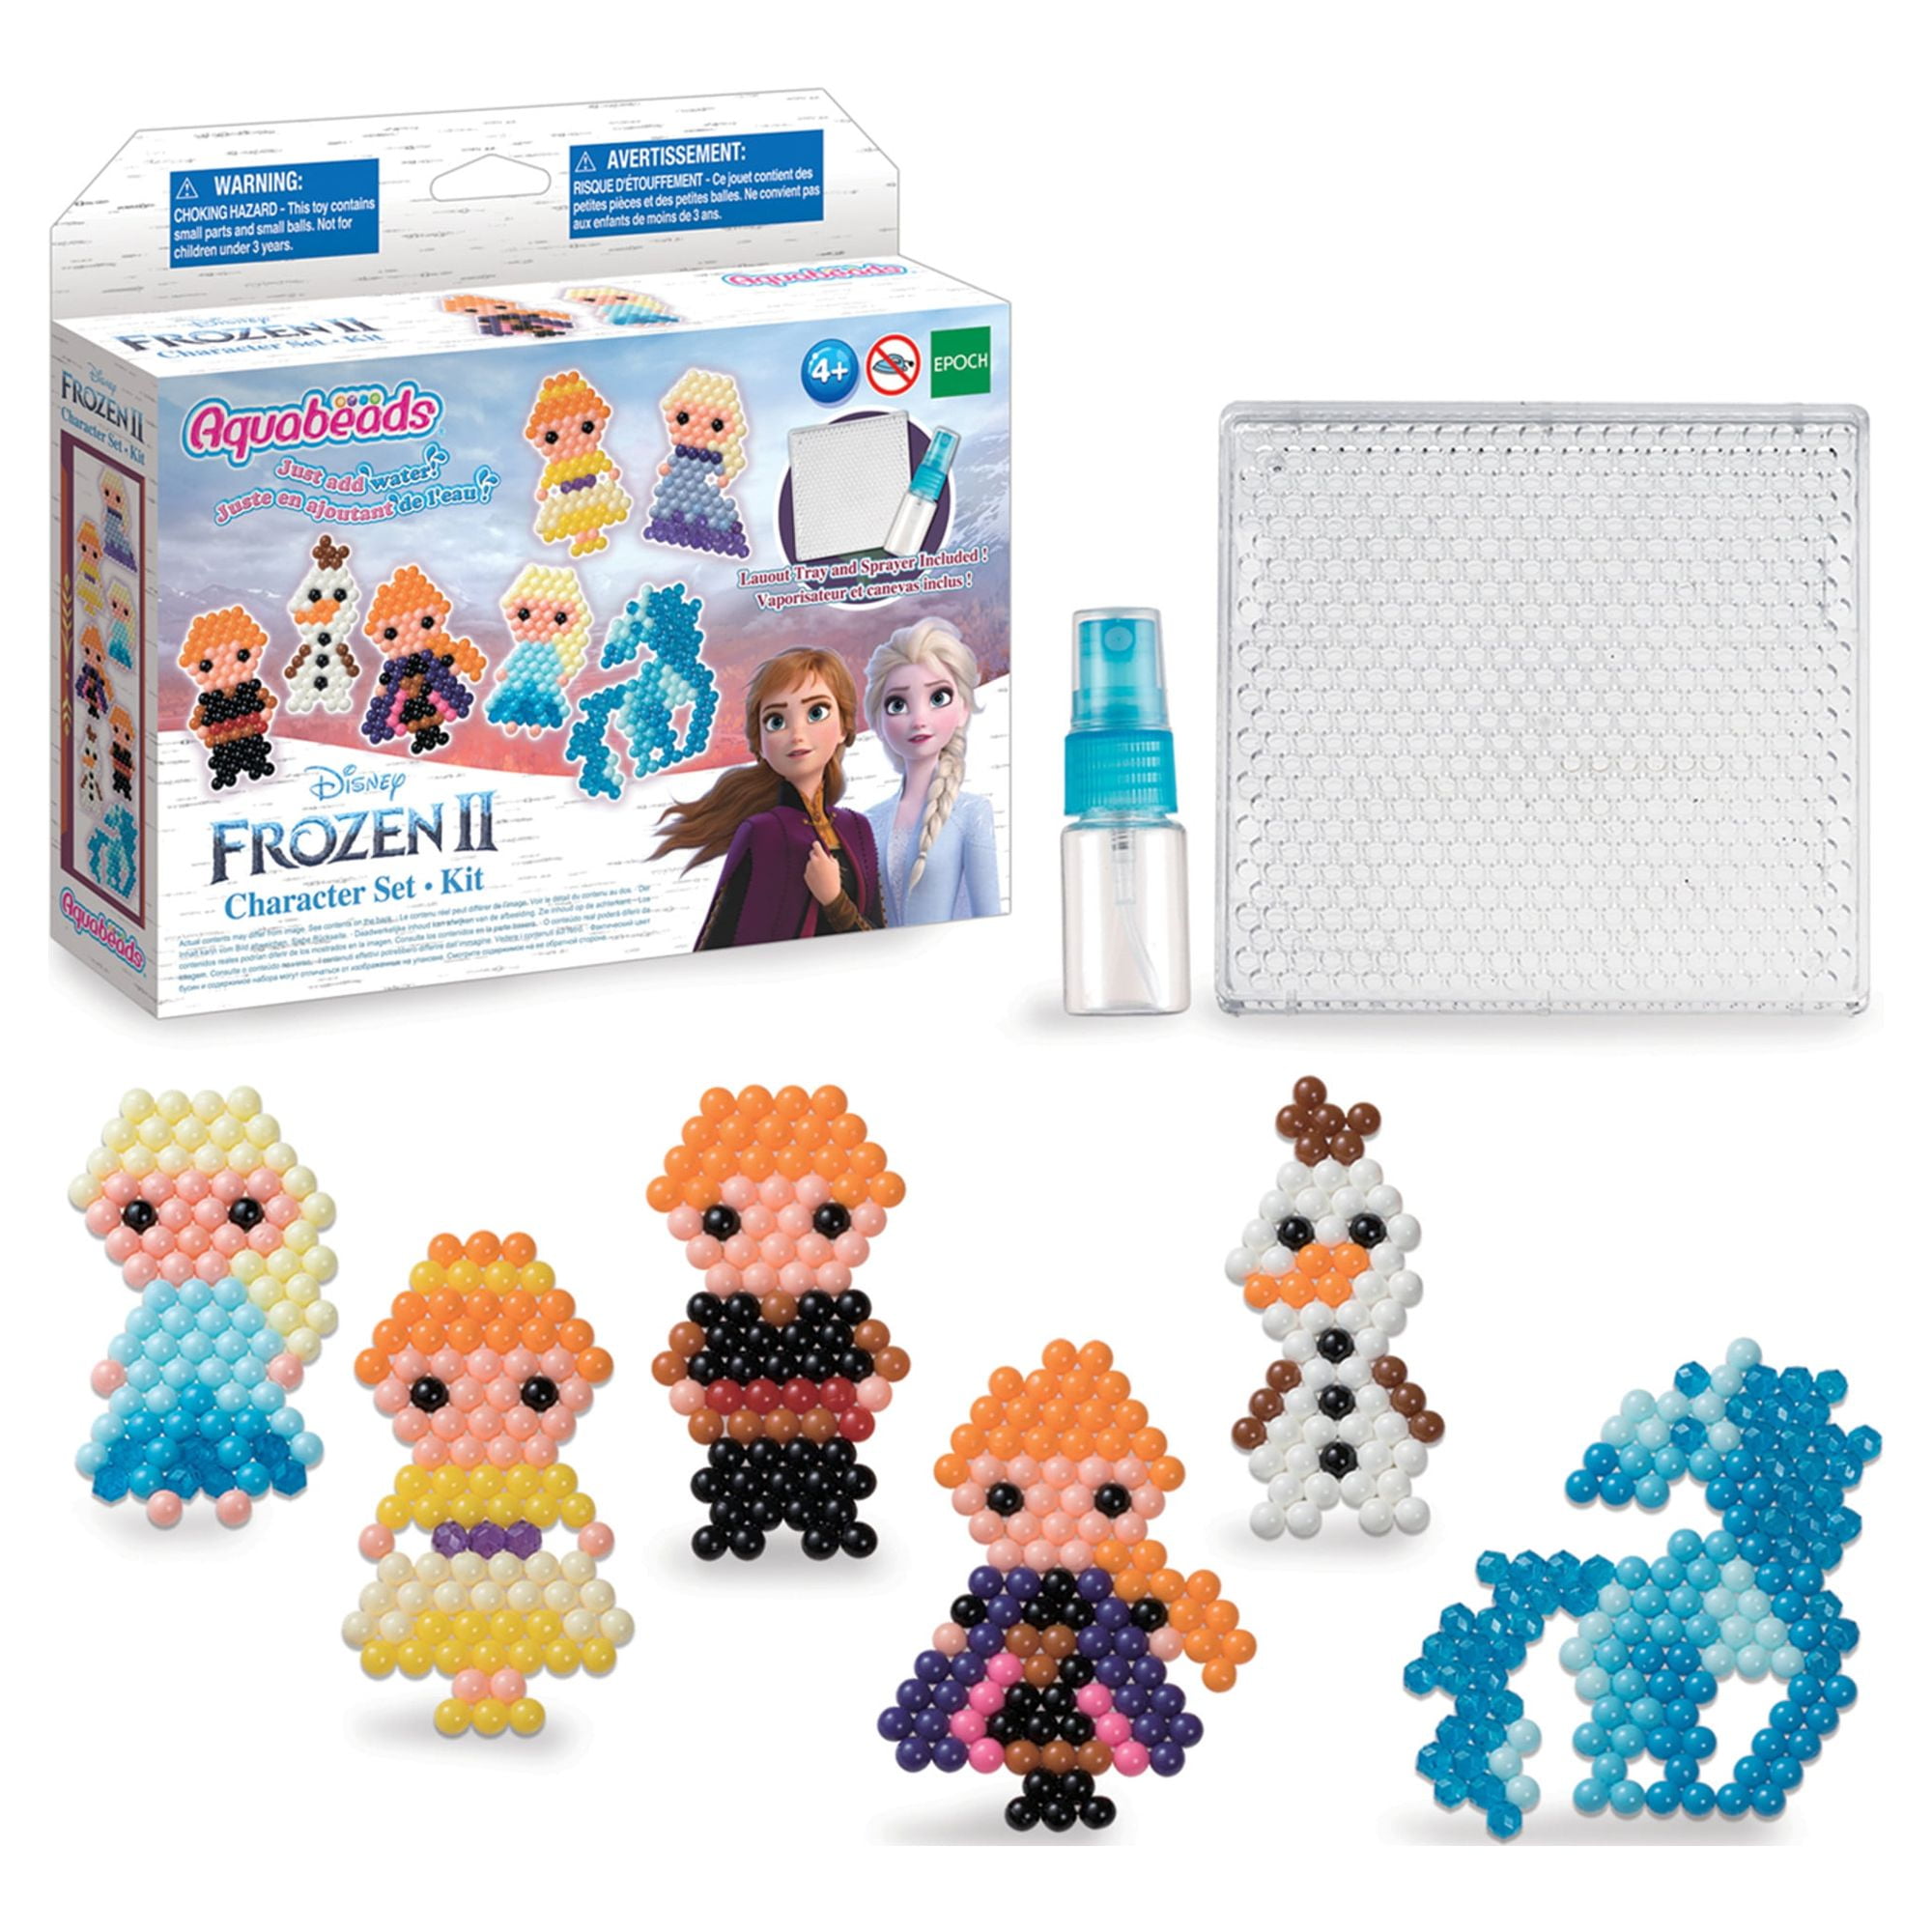 Aquabeads Deluxe Craft Backpack, Complete Arts & Crafts Bead Kit for  Children - Over 1,000 Beads 